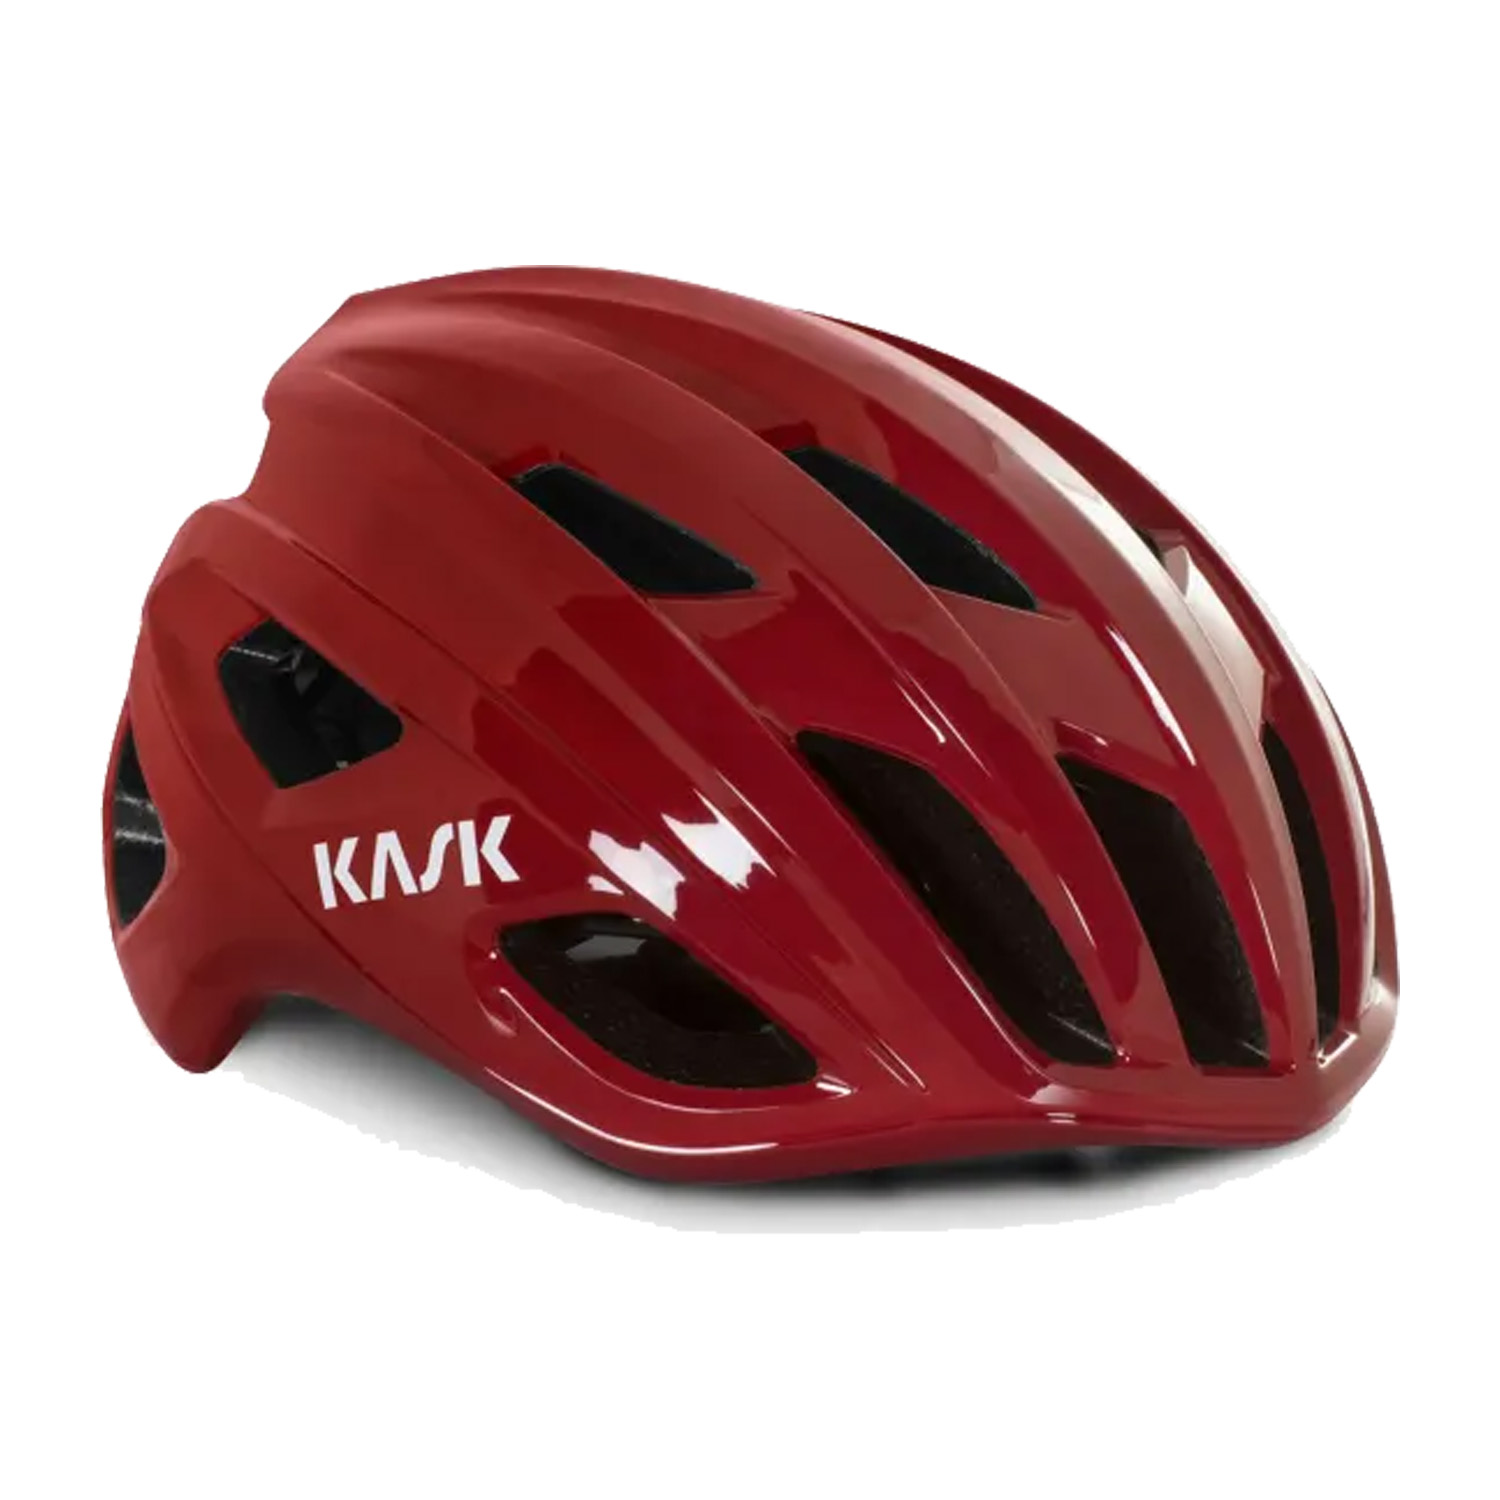 Kask Mojito 3 Limited racefiets helm